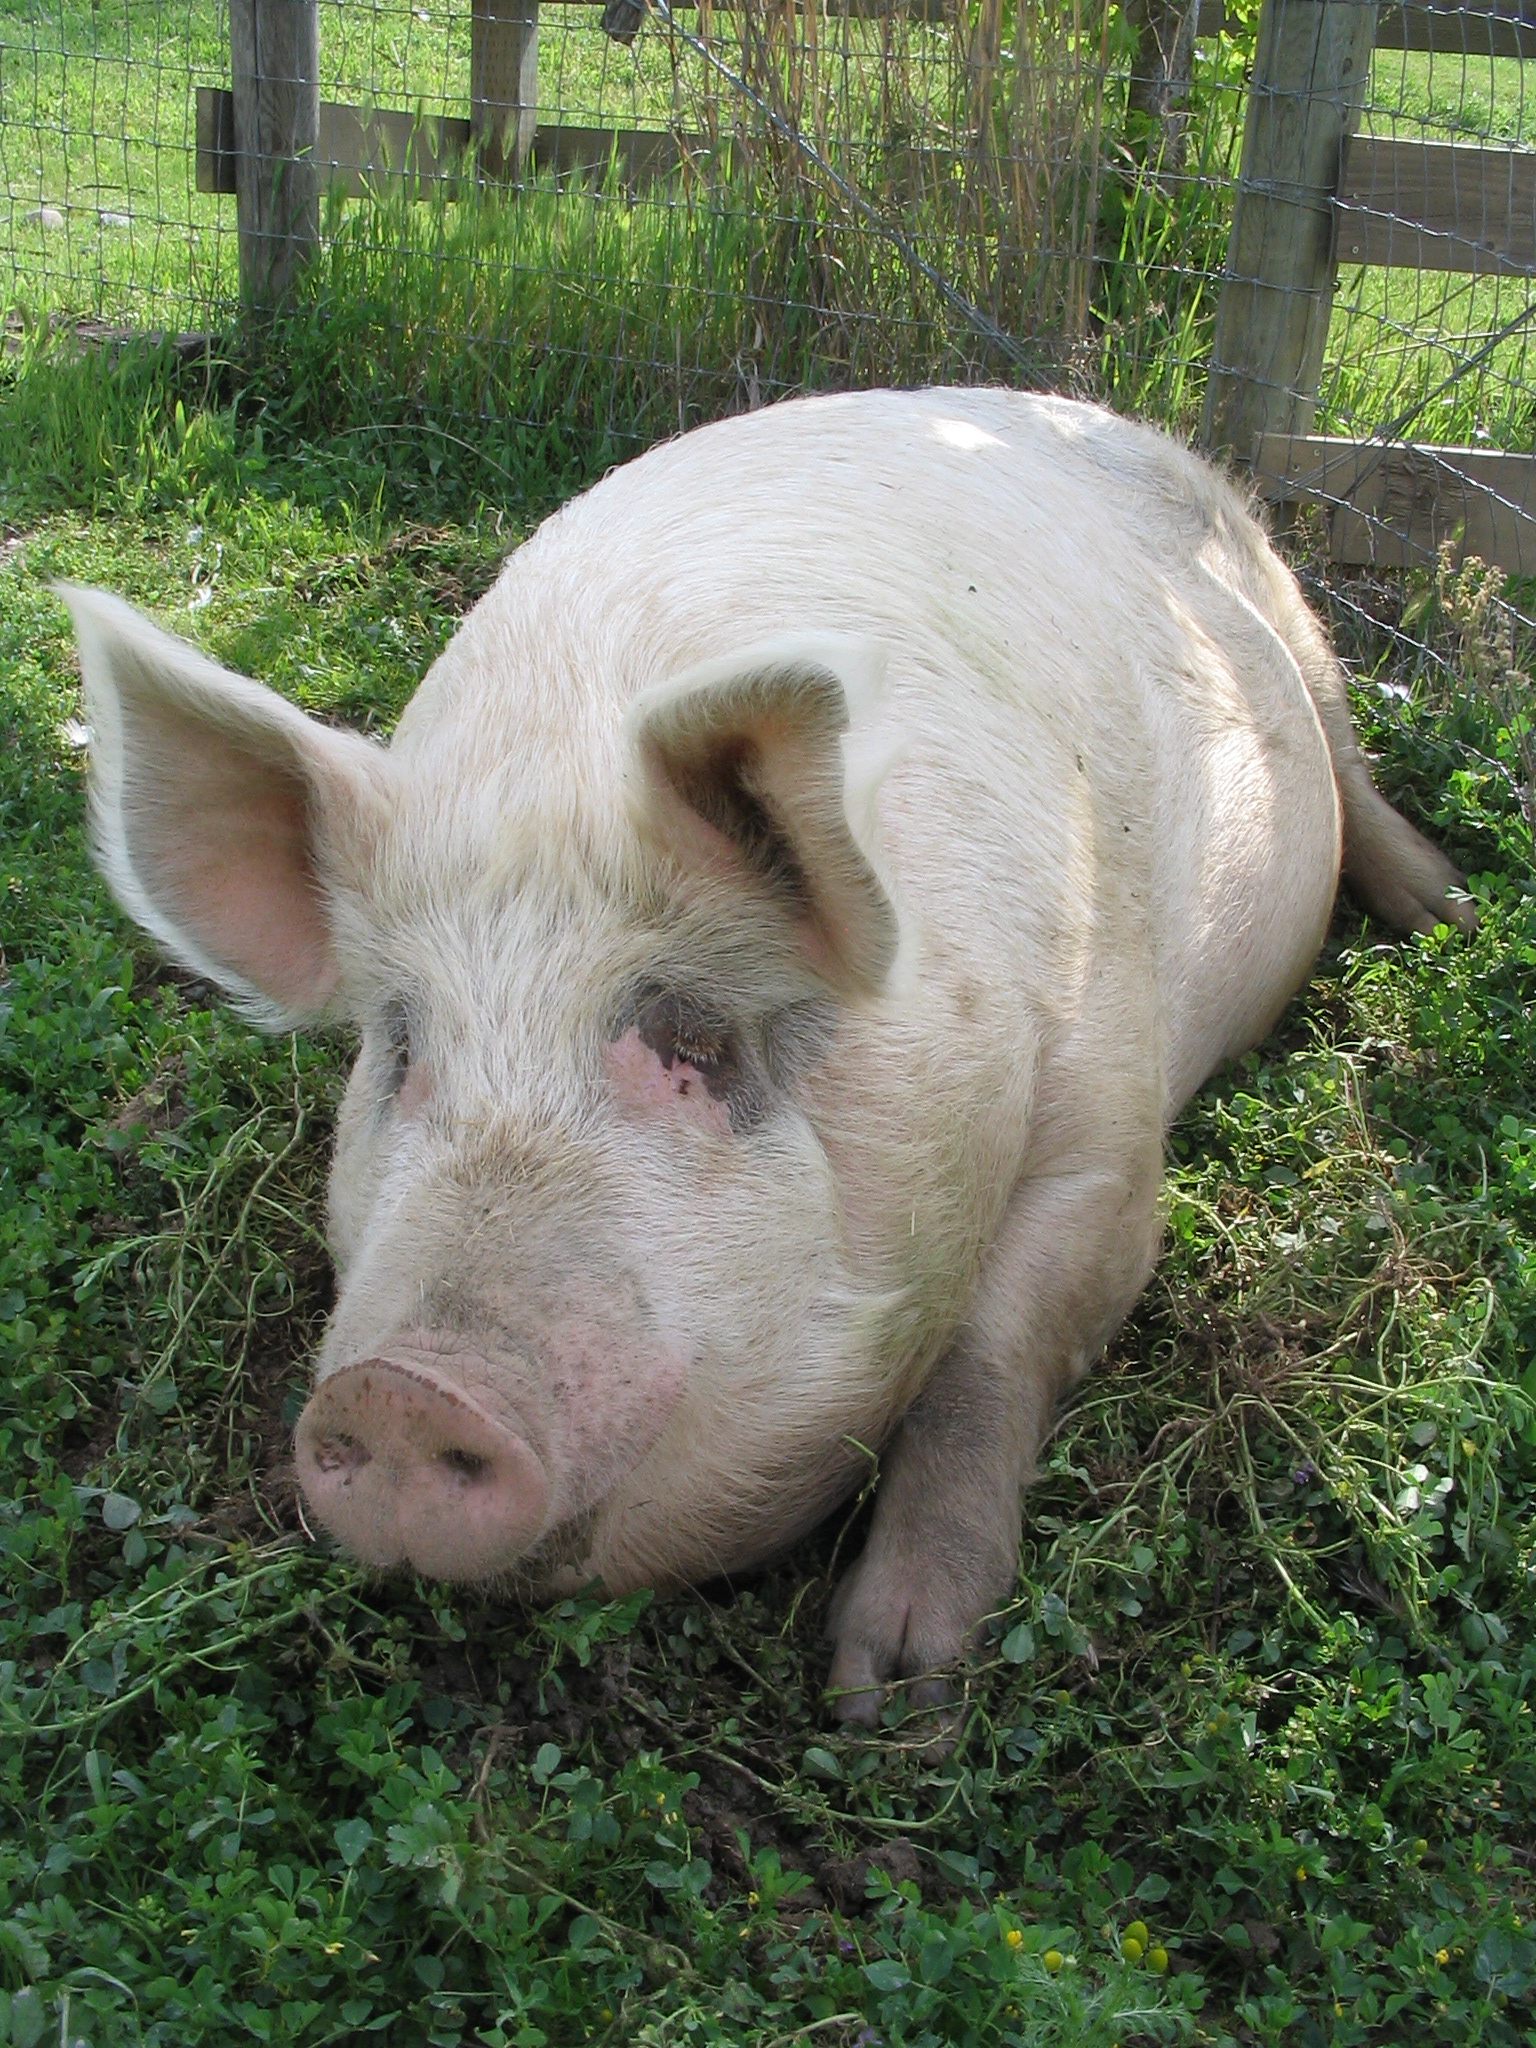 Lil' Bud pig, rescued in the 2012 Cattaraugus rescue.